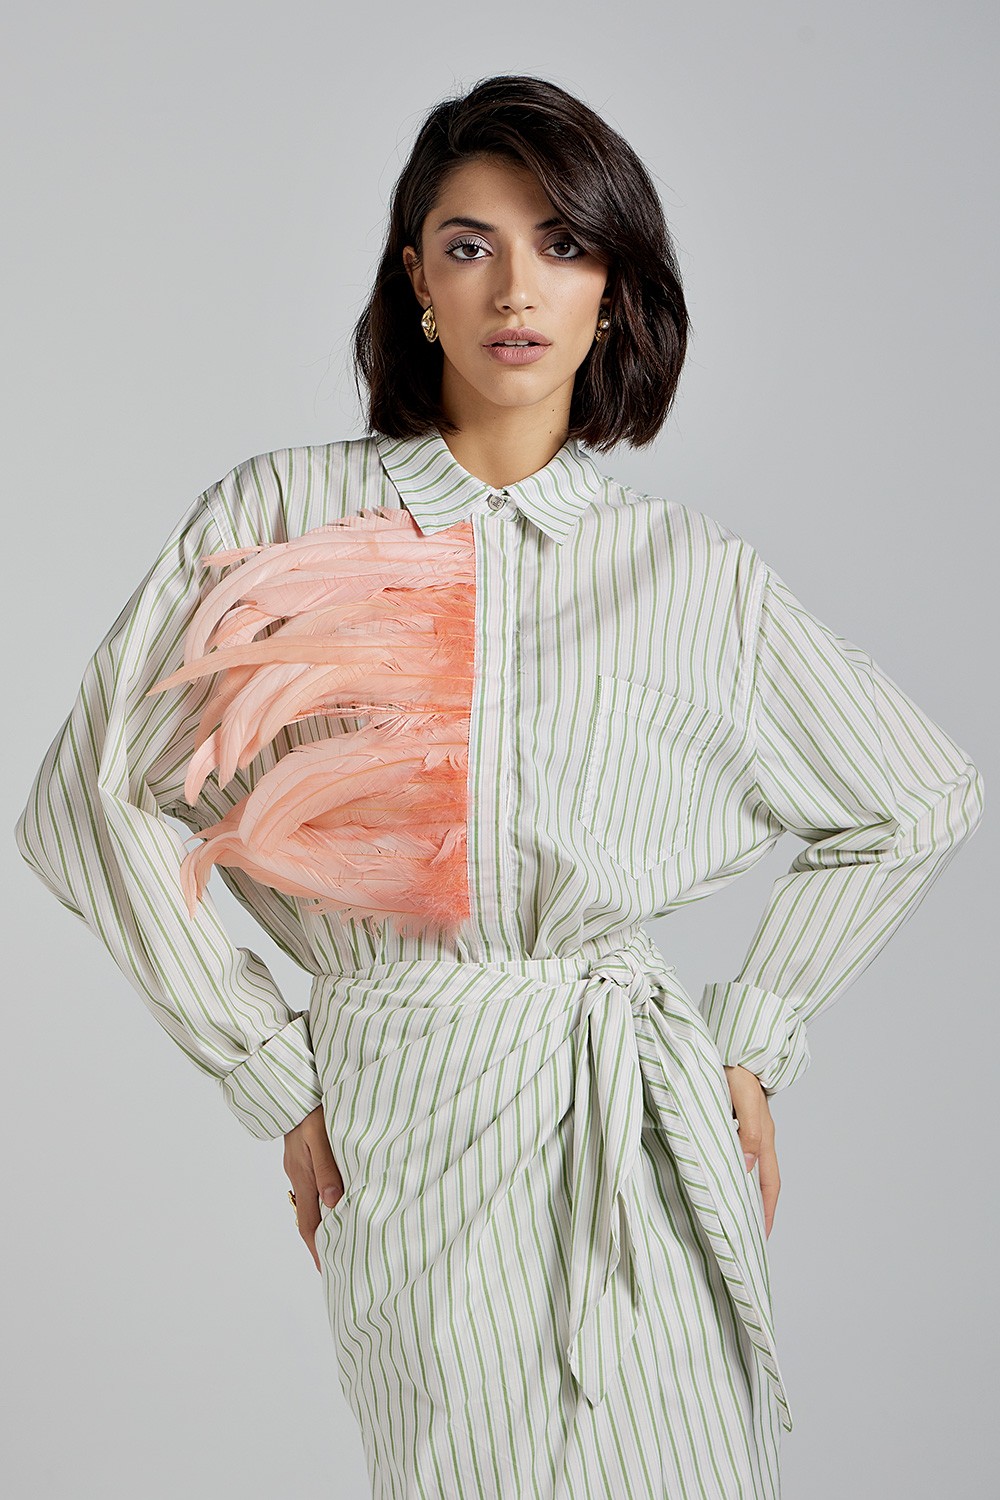 MILKWHITE striped shirt with feathers